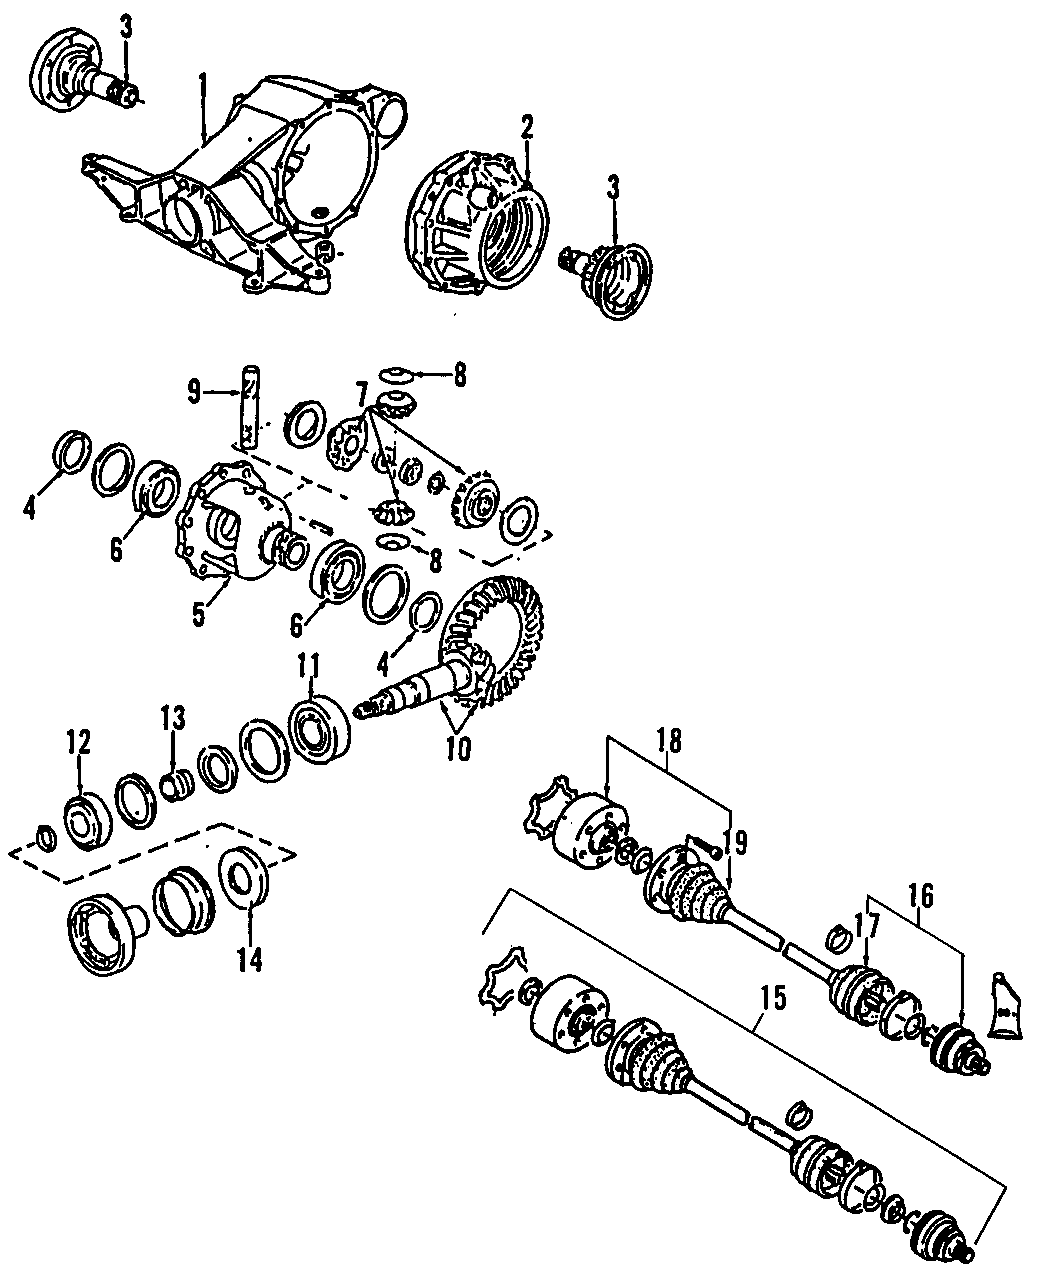 18DRIVE AXLES. REAR AXLE. AXLE SHAFTS & JOINTS. DIFFERENTIAL. PROPELLER SHAFT.https://images.simplepart.com/images/parts/motor/fullsize/F208150.png